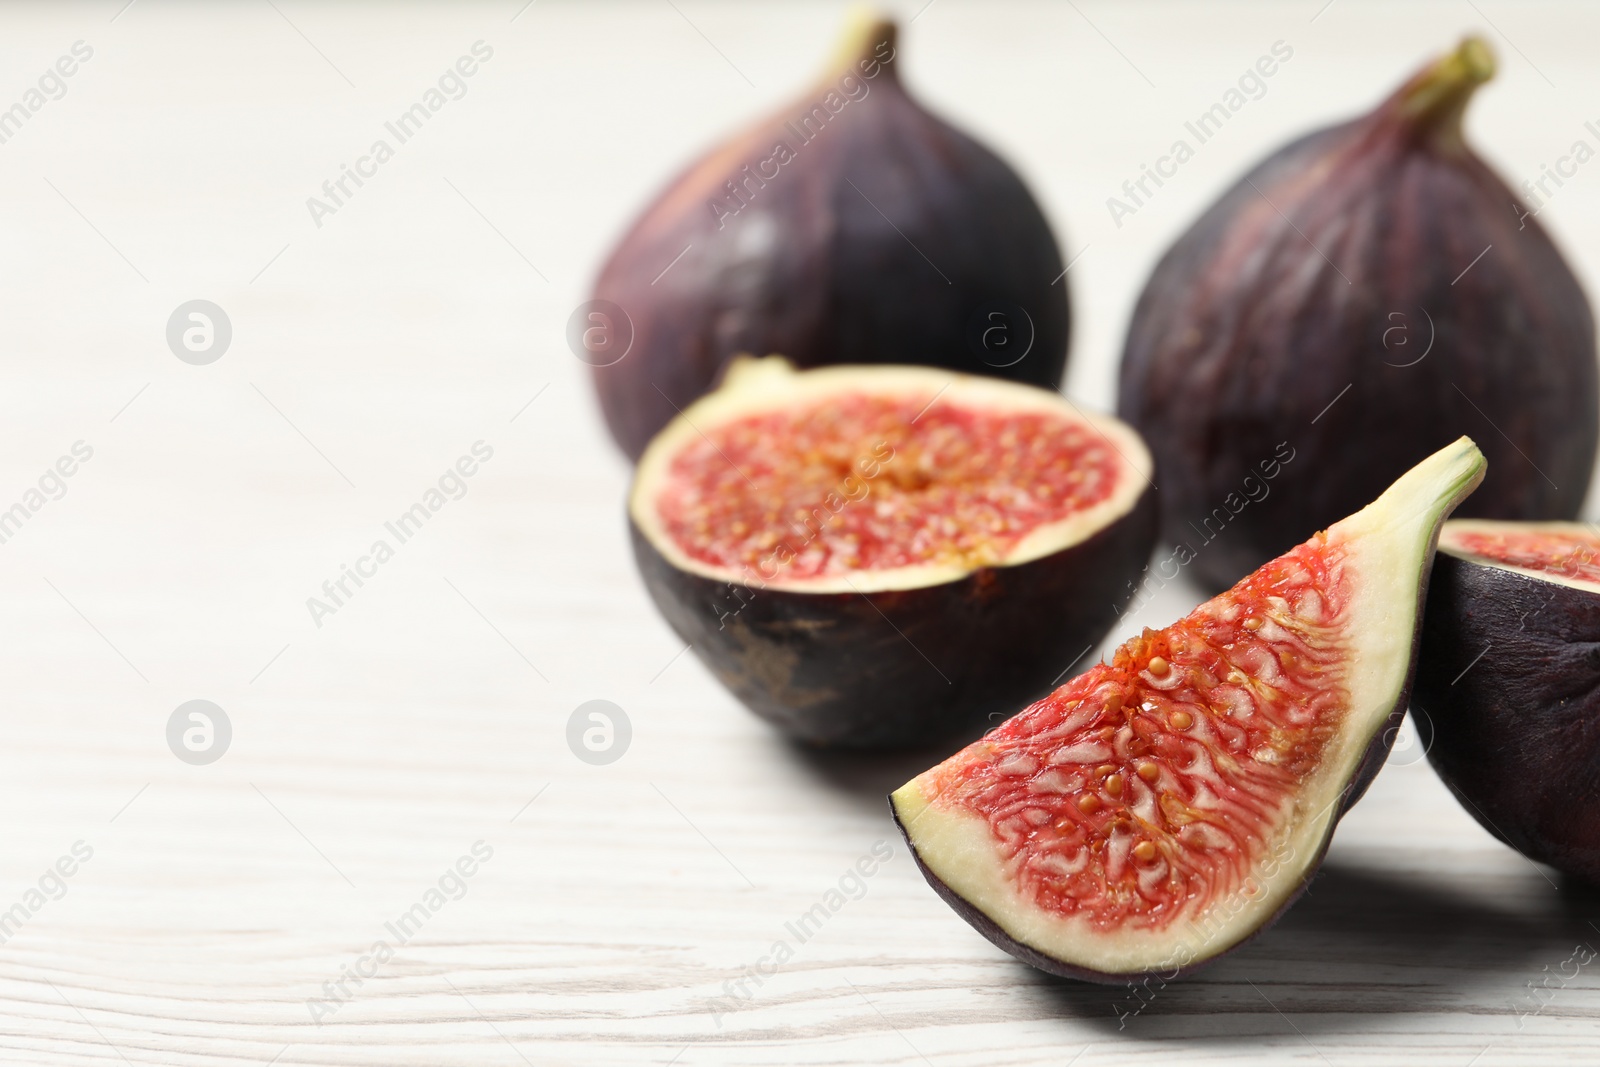 Photo of Whole and cut ripe figs on white wooden table, closeup. Space for text